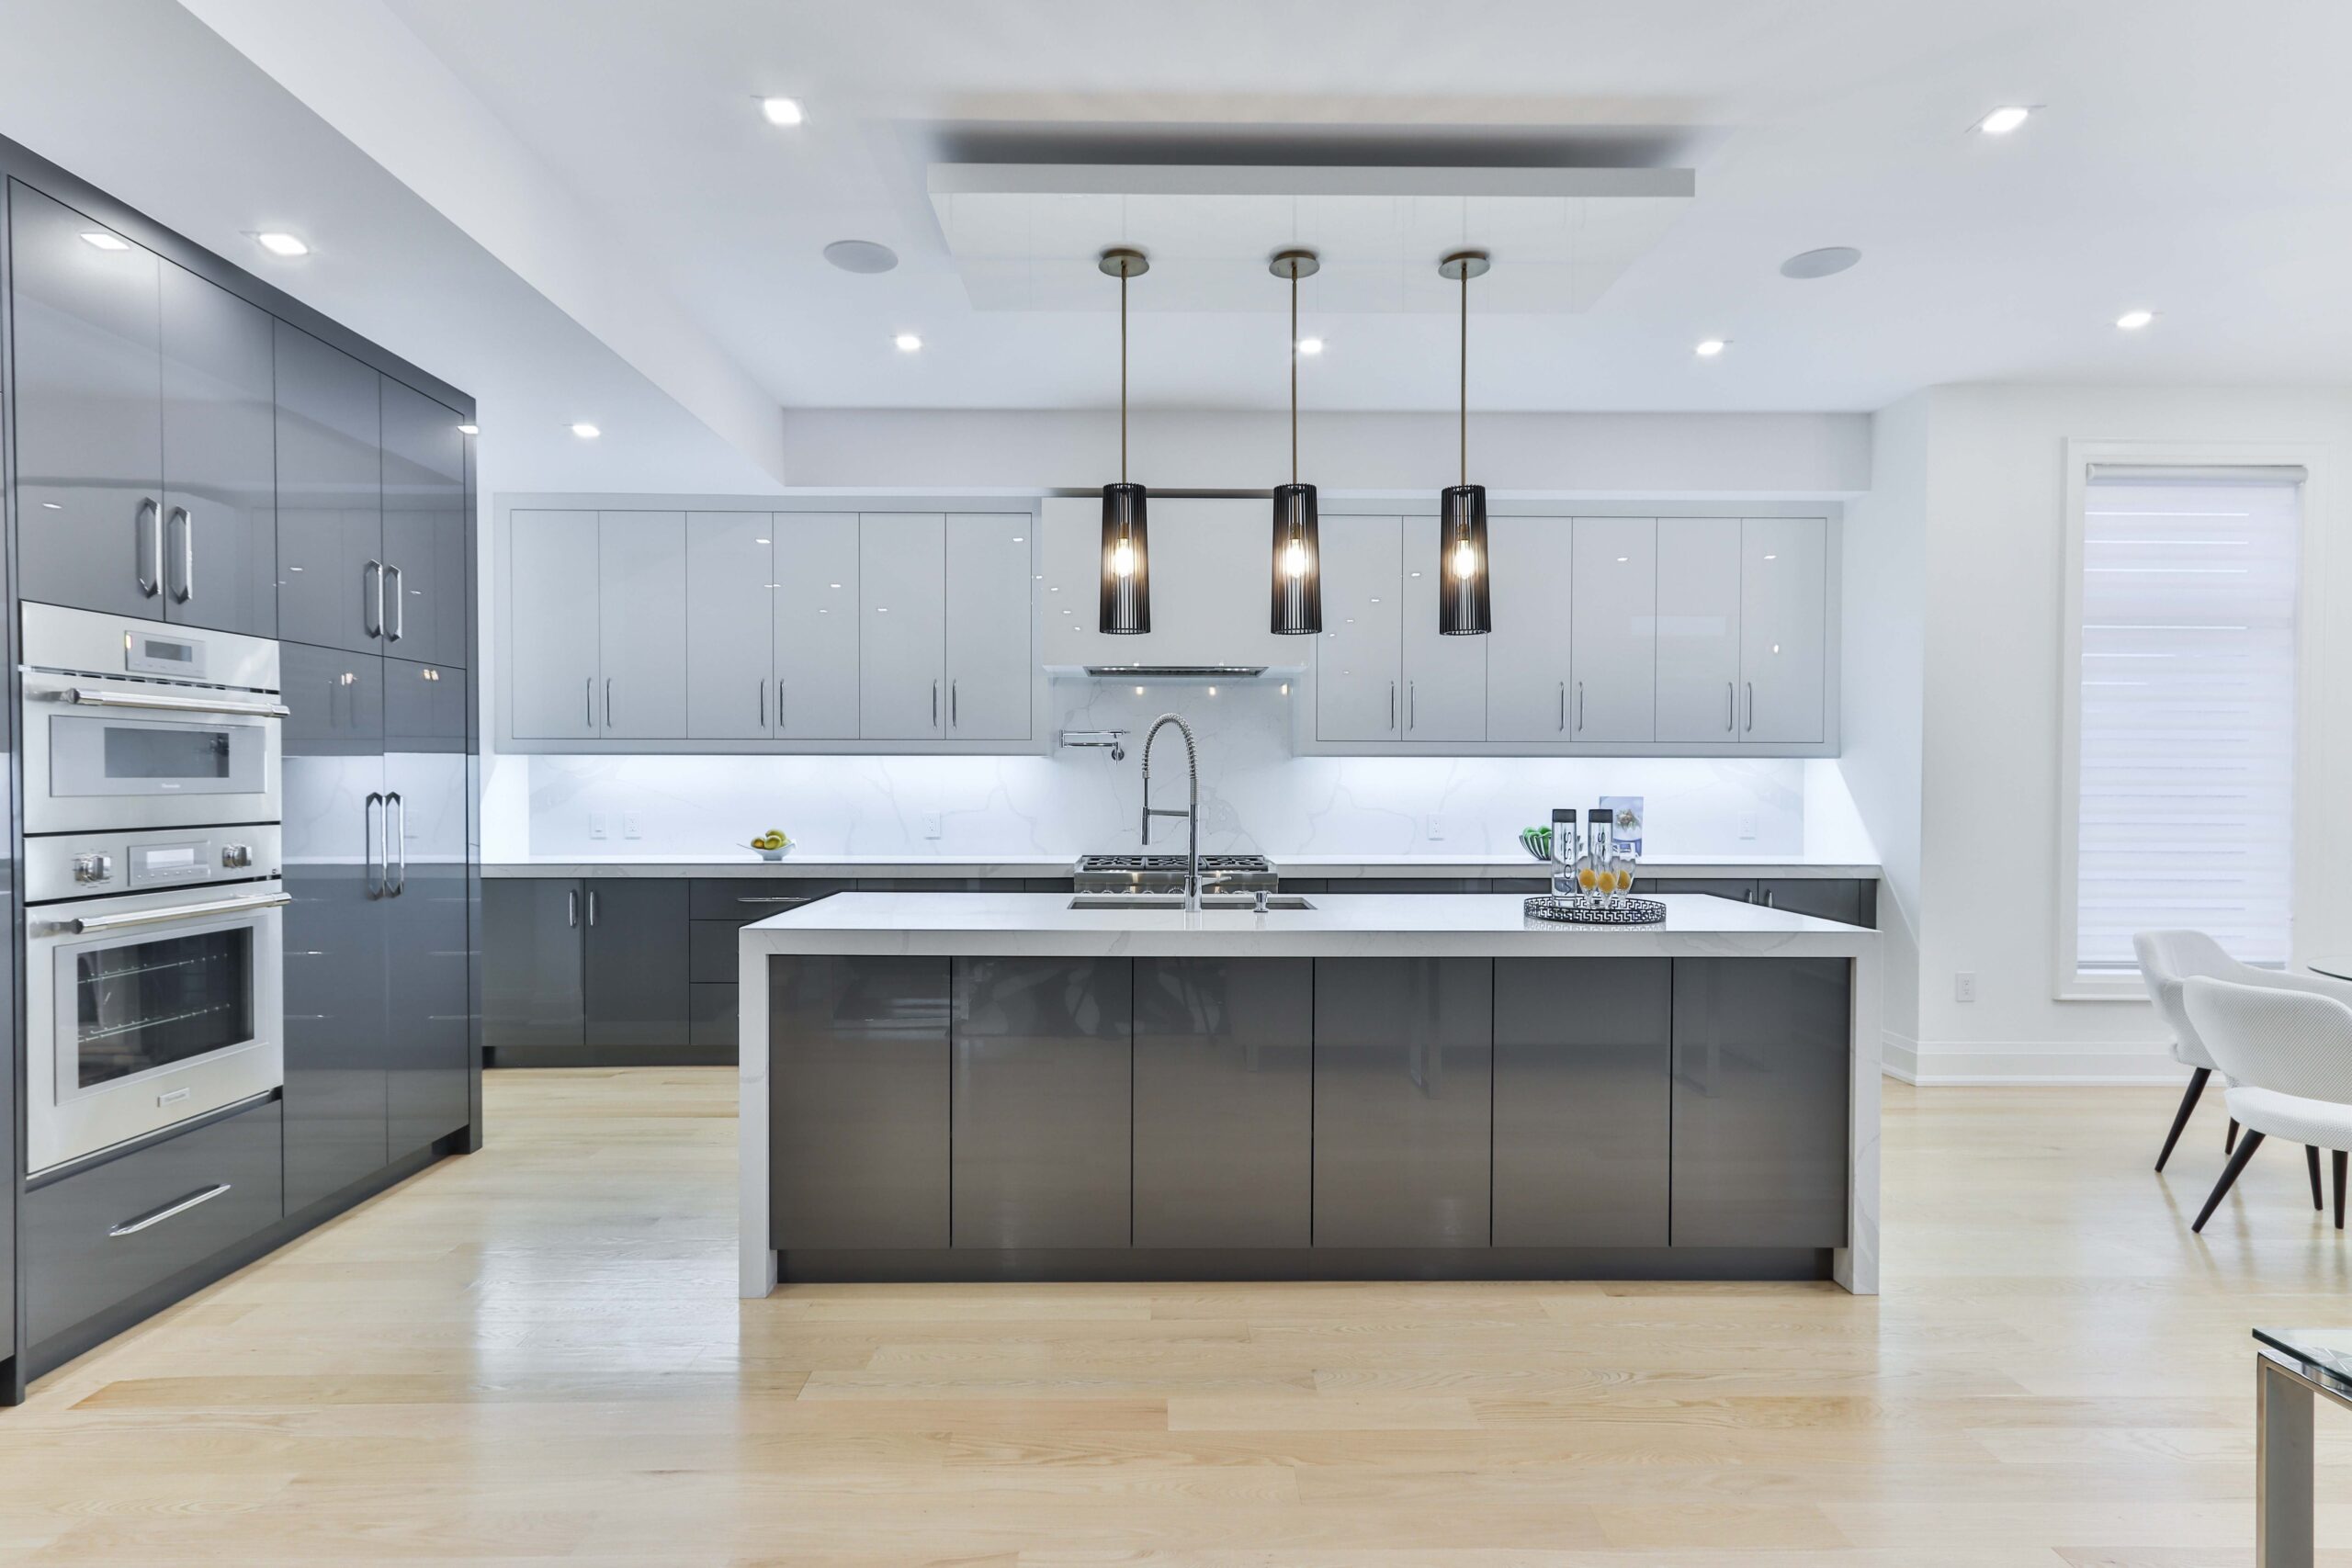 Laminate Kitchen Or Acrylic Kitchen: Which Kitchen Cabinet Finish is the Best?